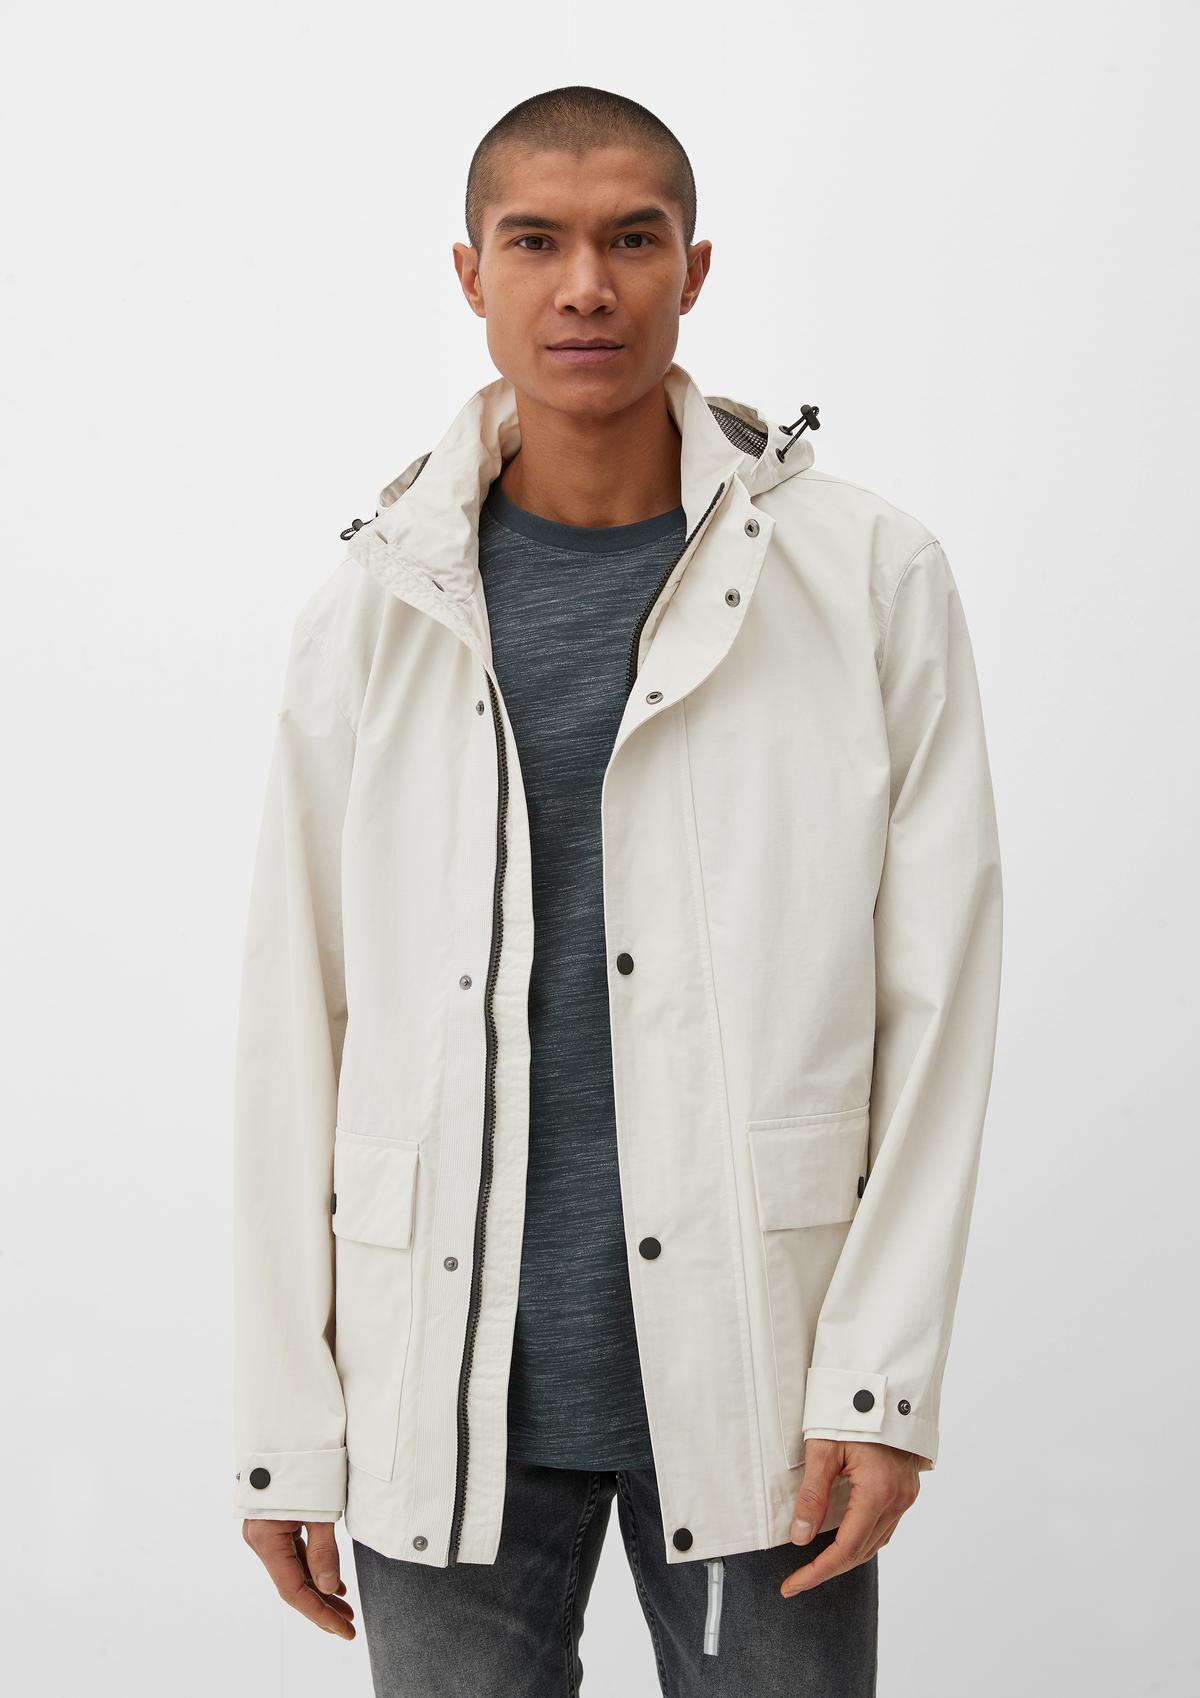 s.Oliver Outdoor jacket with a mesh insert